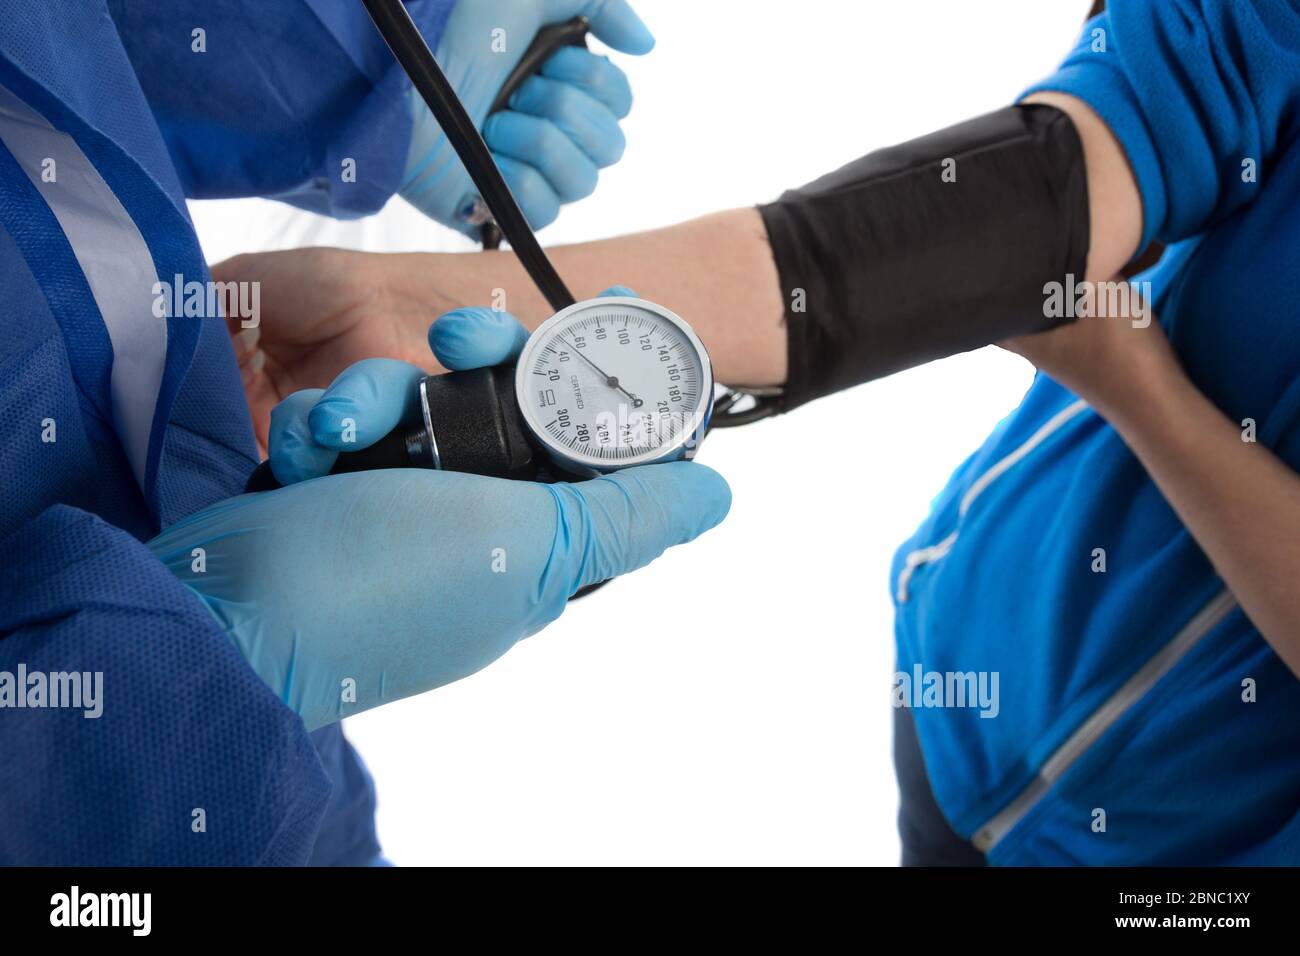 Blood pressure measuring. Doctor and patient. Isolated on white background. Health care. Stock Photo